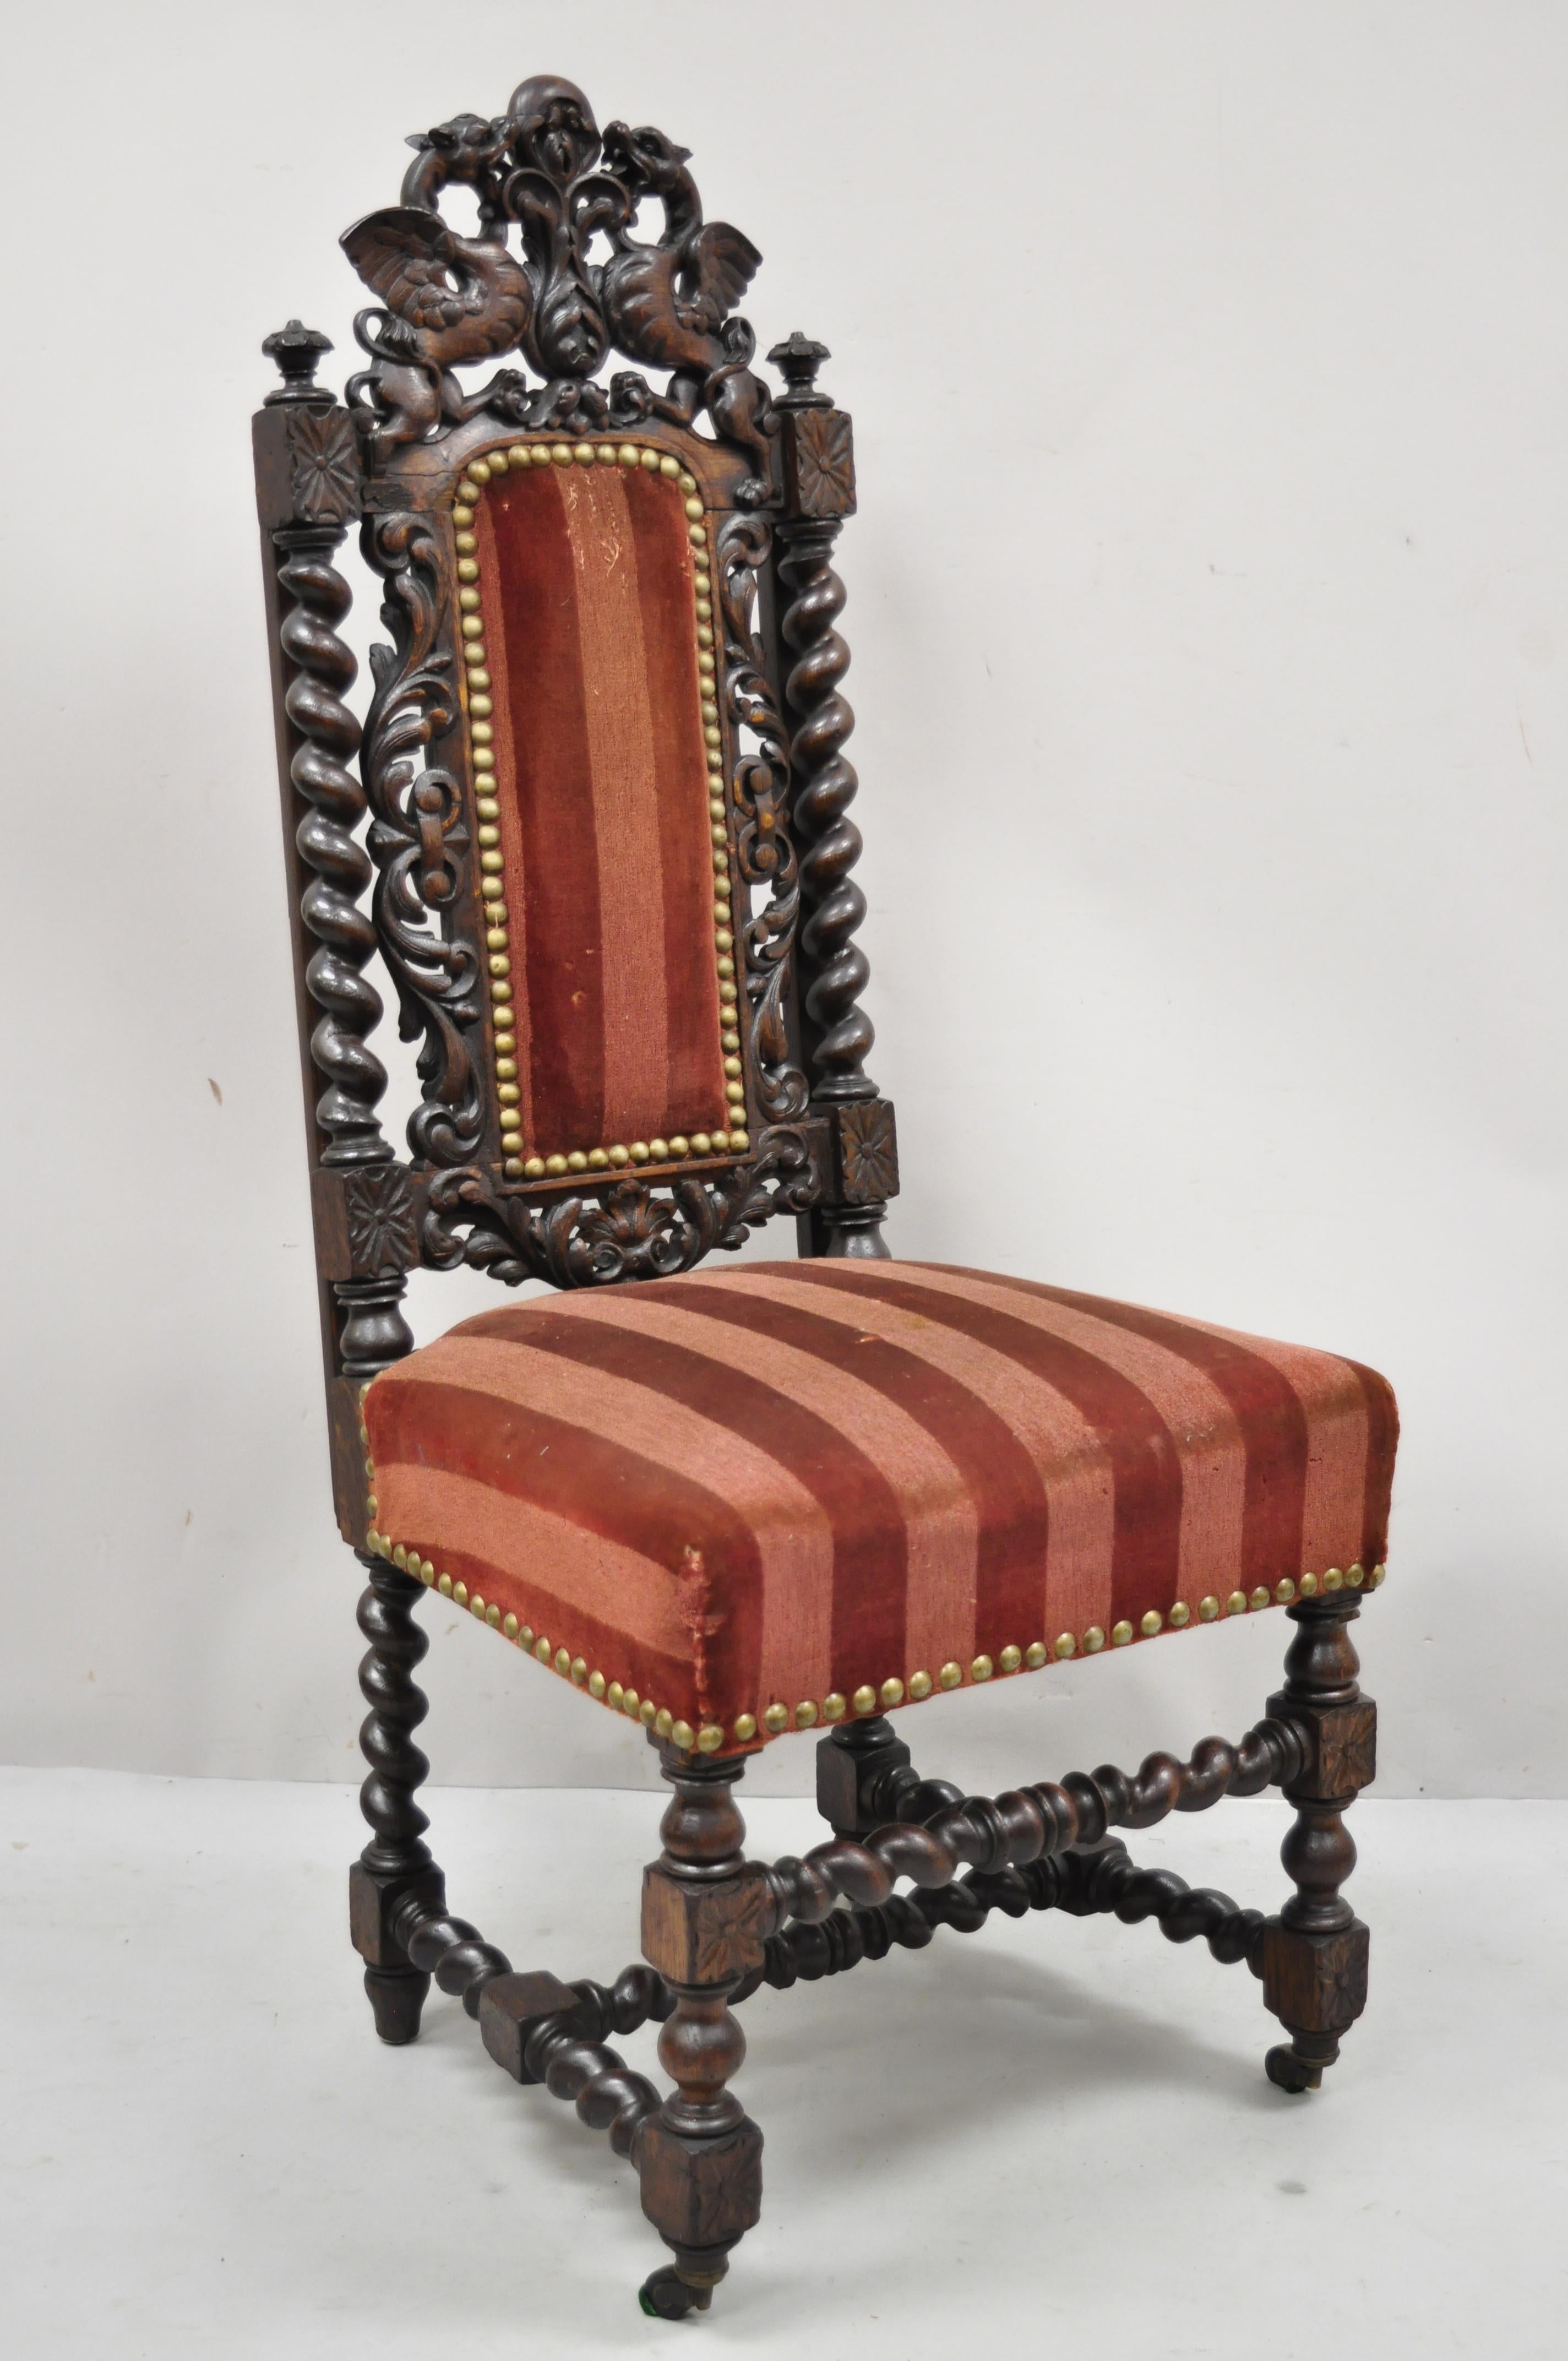 Antique Italian Renaissance lion dragon winged griffin carved barley twist side chair. Item features winged dragon griffin carved backrest, barley twist spiral carved supports, solid wood frame, beautiful wood grain, Circa 19th century.